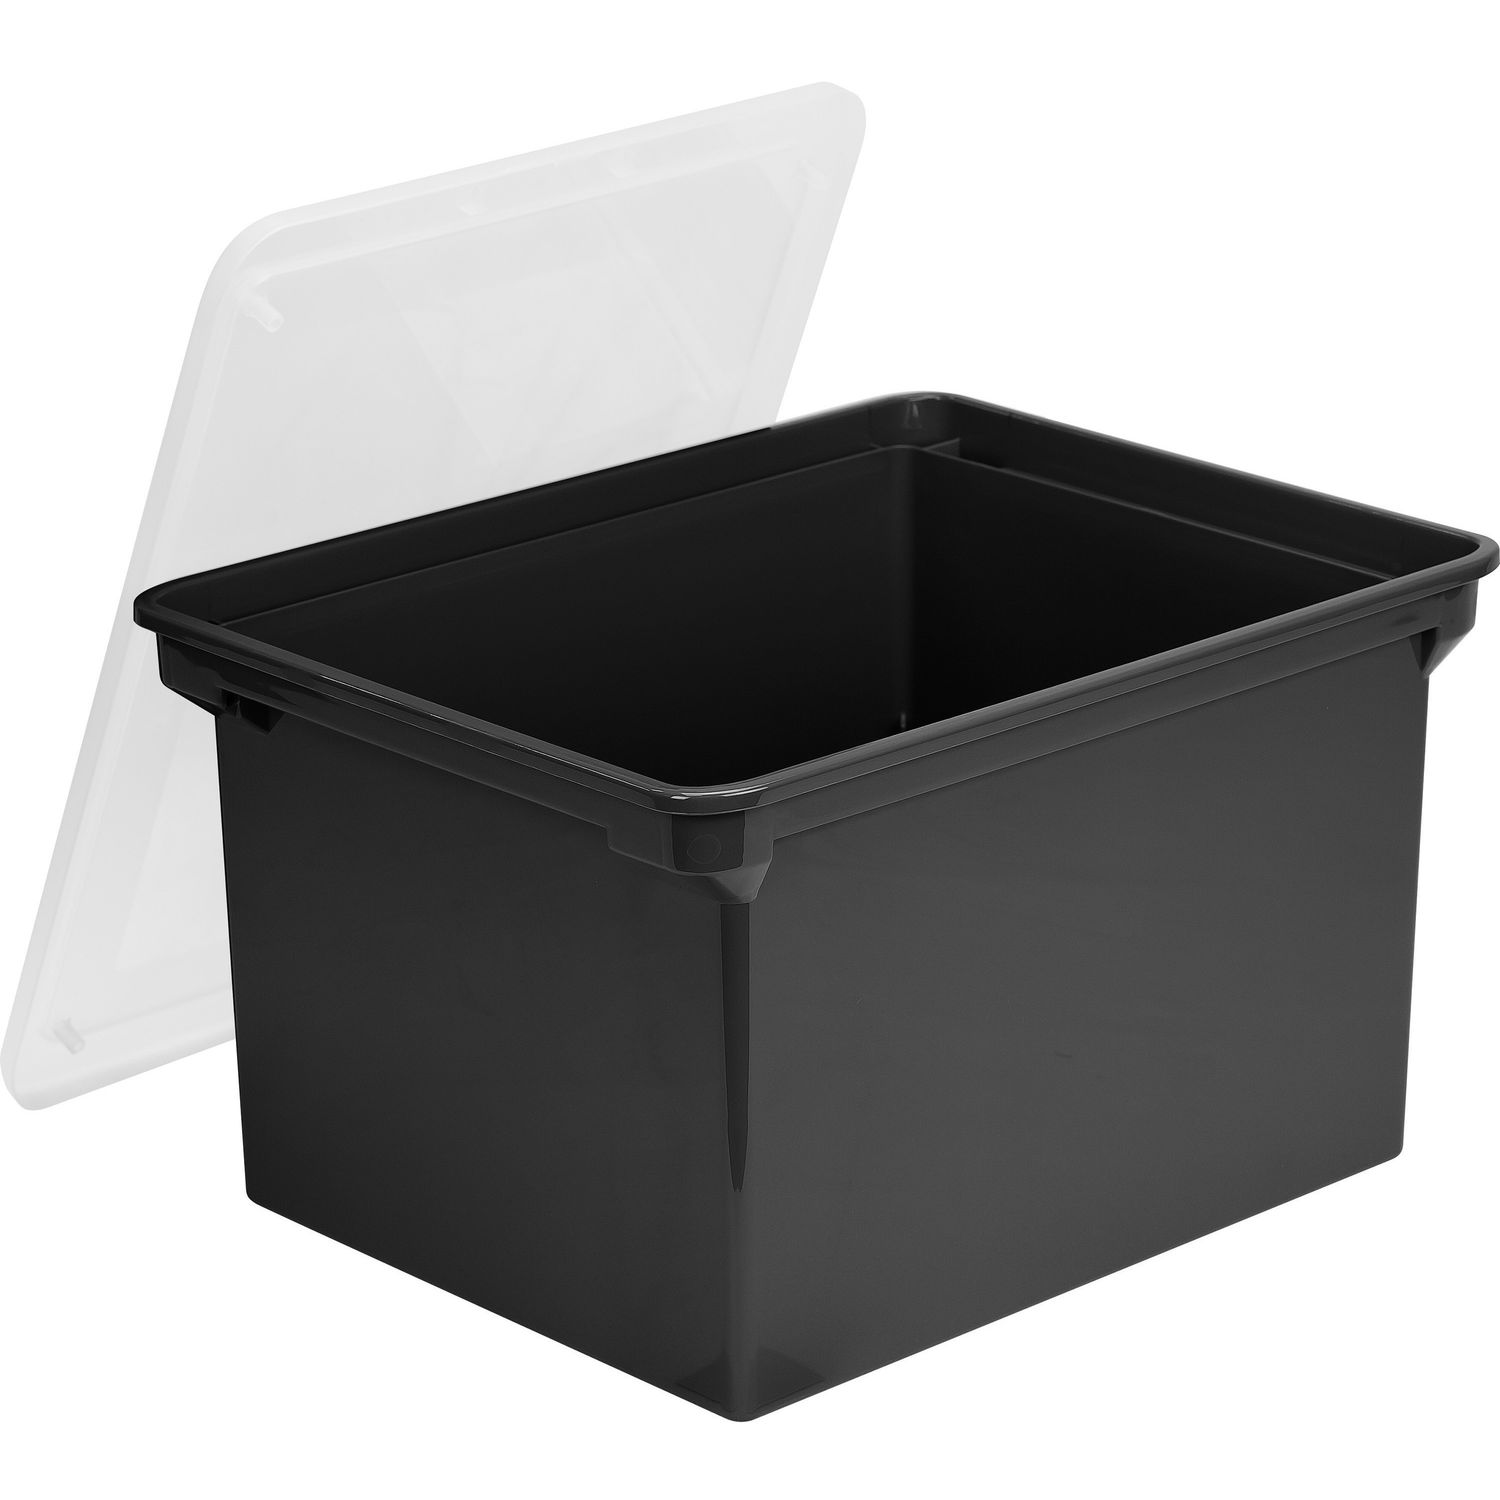 Letter/Legal Tote Storage Box Internal Dimensions: 15.50" Length x 12.25" Width x 9.25" Height, External Dimensions: 18.3" Length x 13.9" Width x 10.6"Height, 45 lb, 9.25 gal